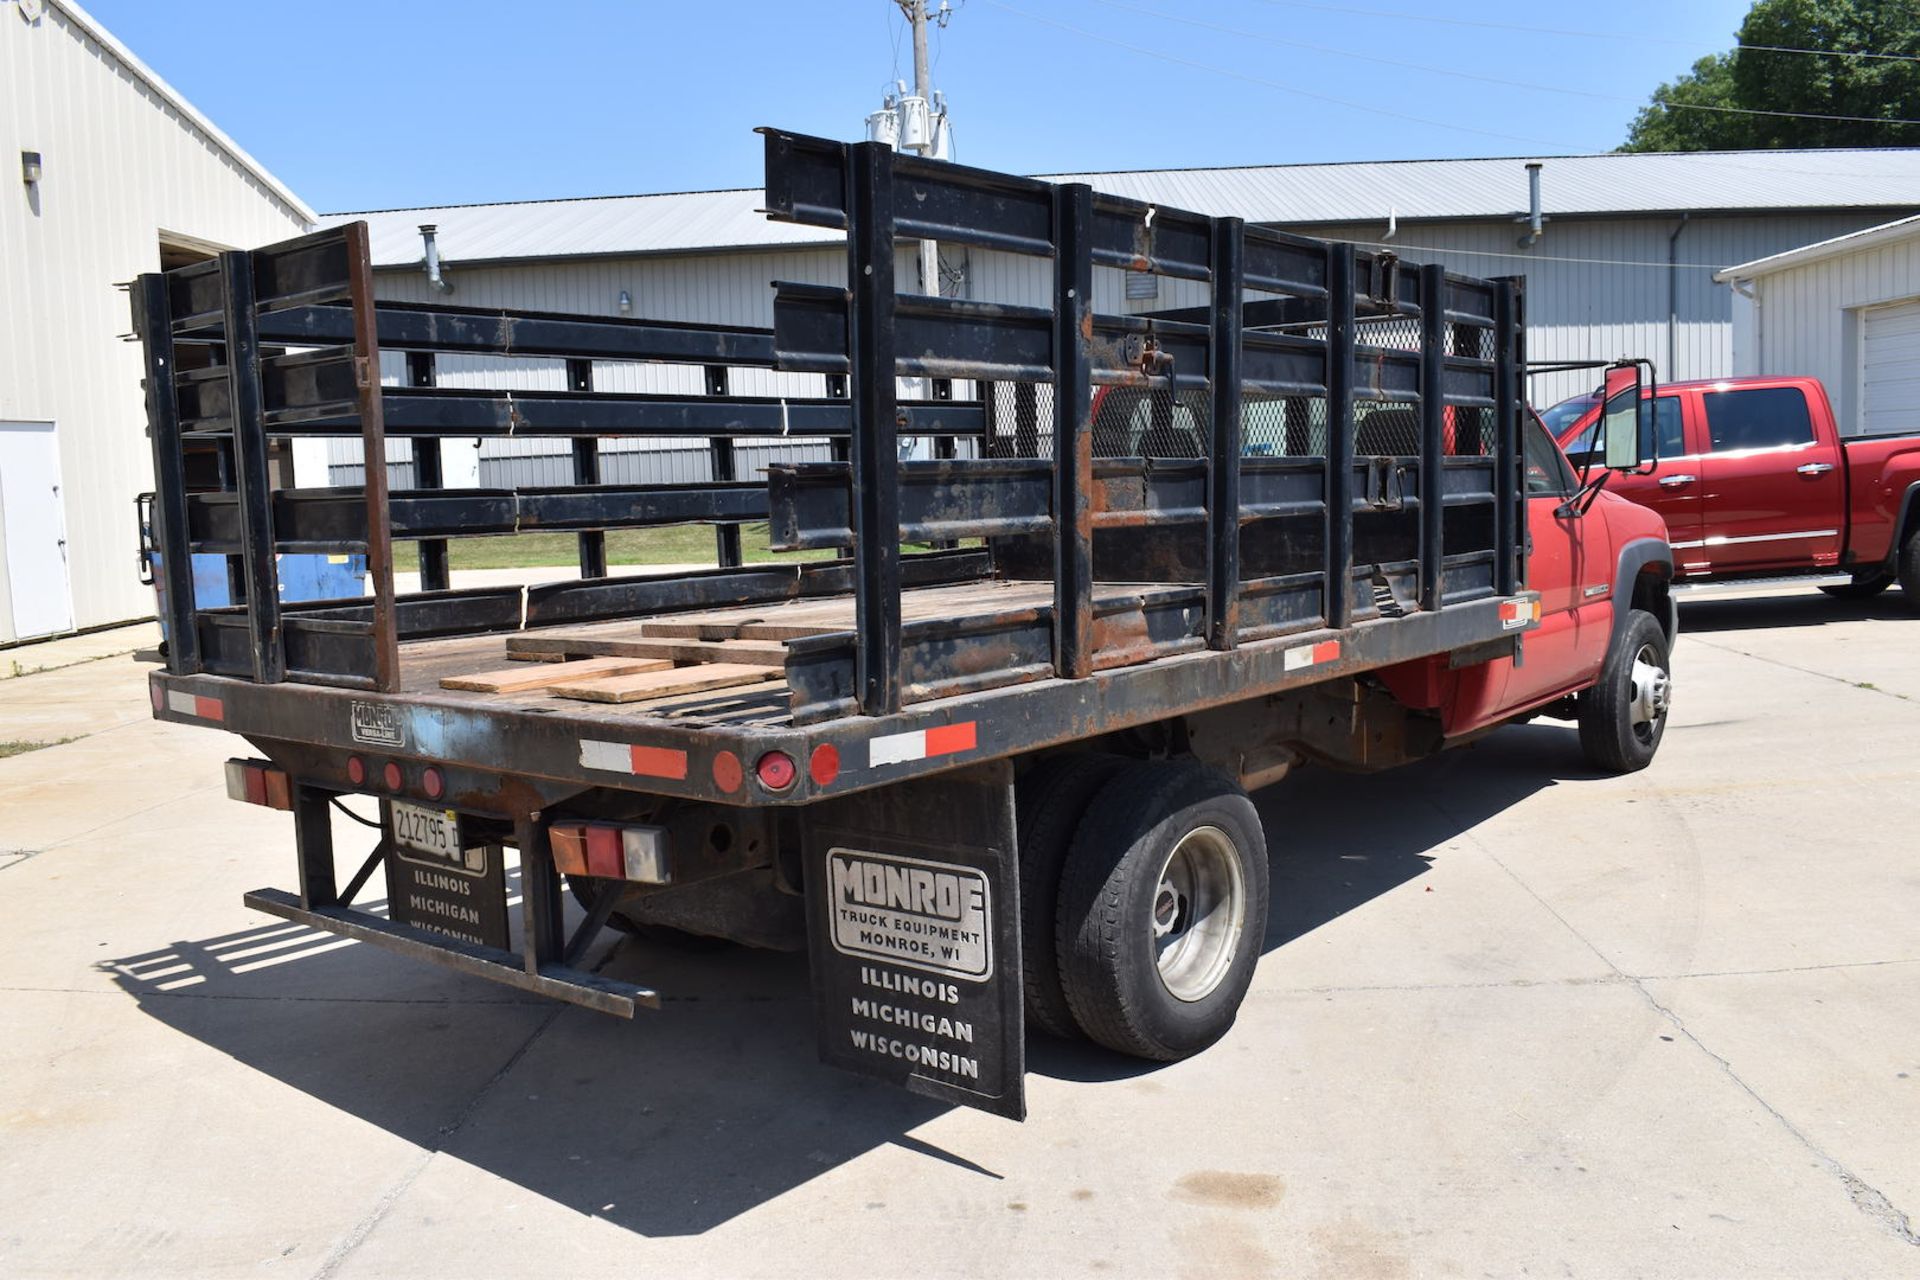 2005 GMC 3500 Single-Axle Stake Bed Truck, VIN 1GDJC34UX5E344645, 12 ft. (approx.) Bed, Vortec 6. - Image 5 of 10